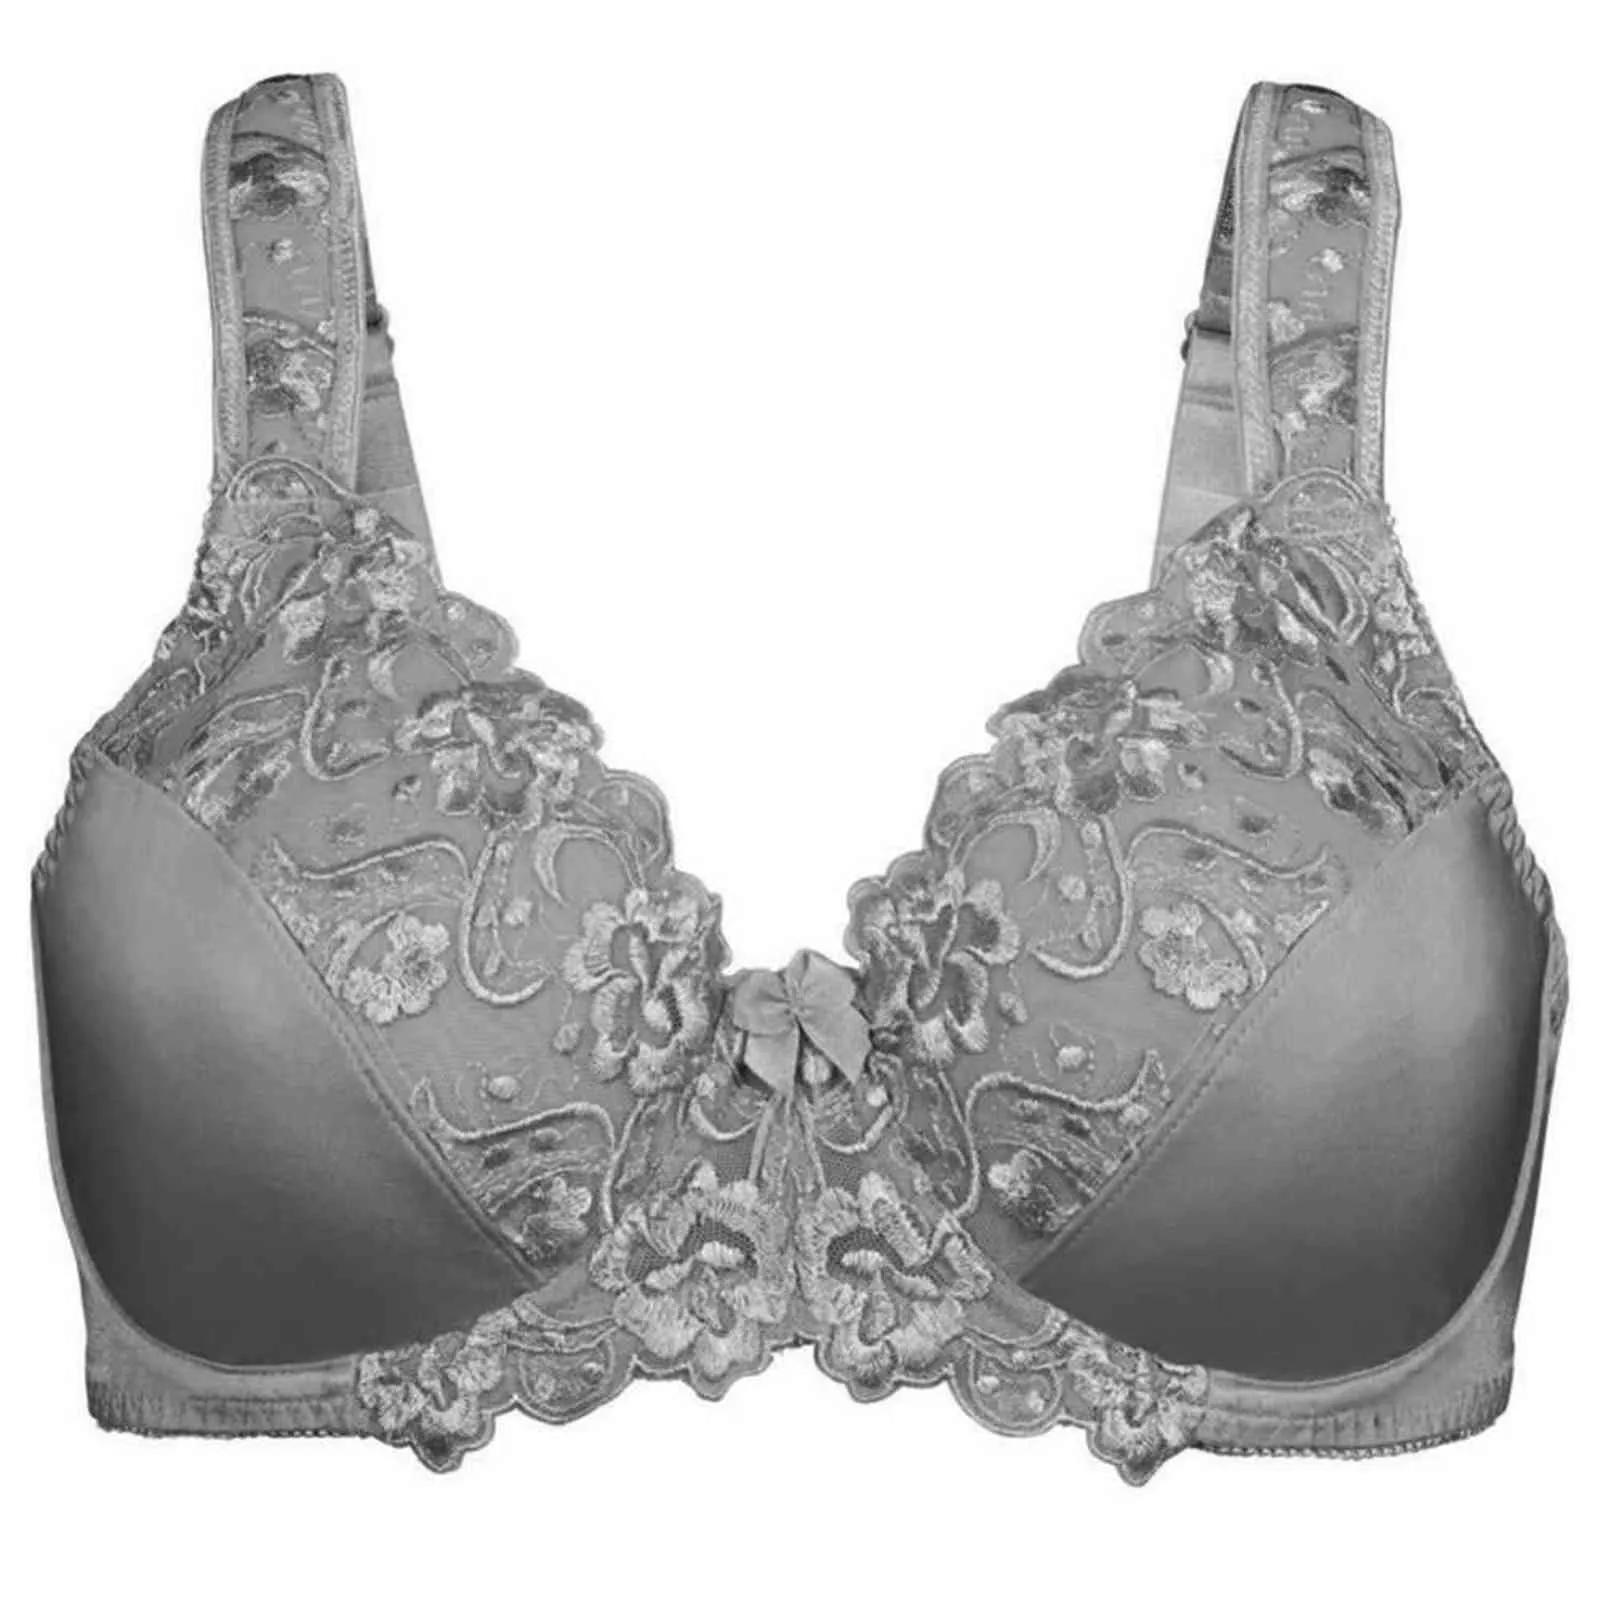 Plus Size Embroidered Lace Lace Push Up Bra In Black, White, And